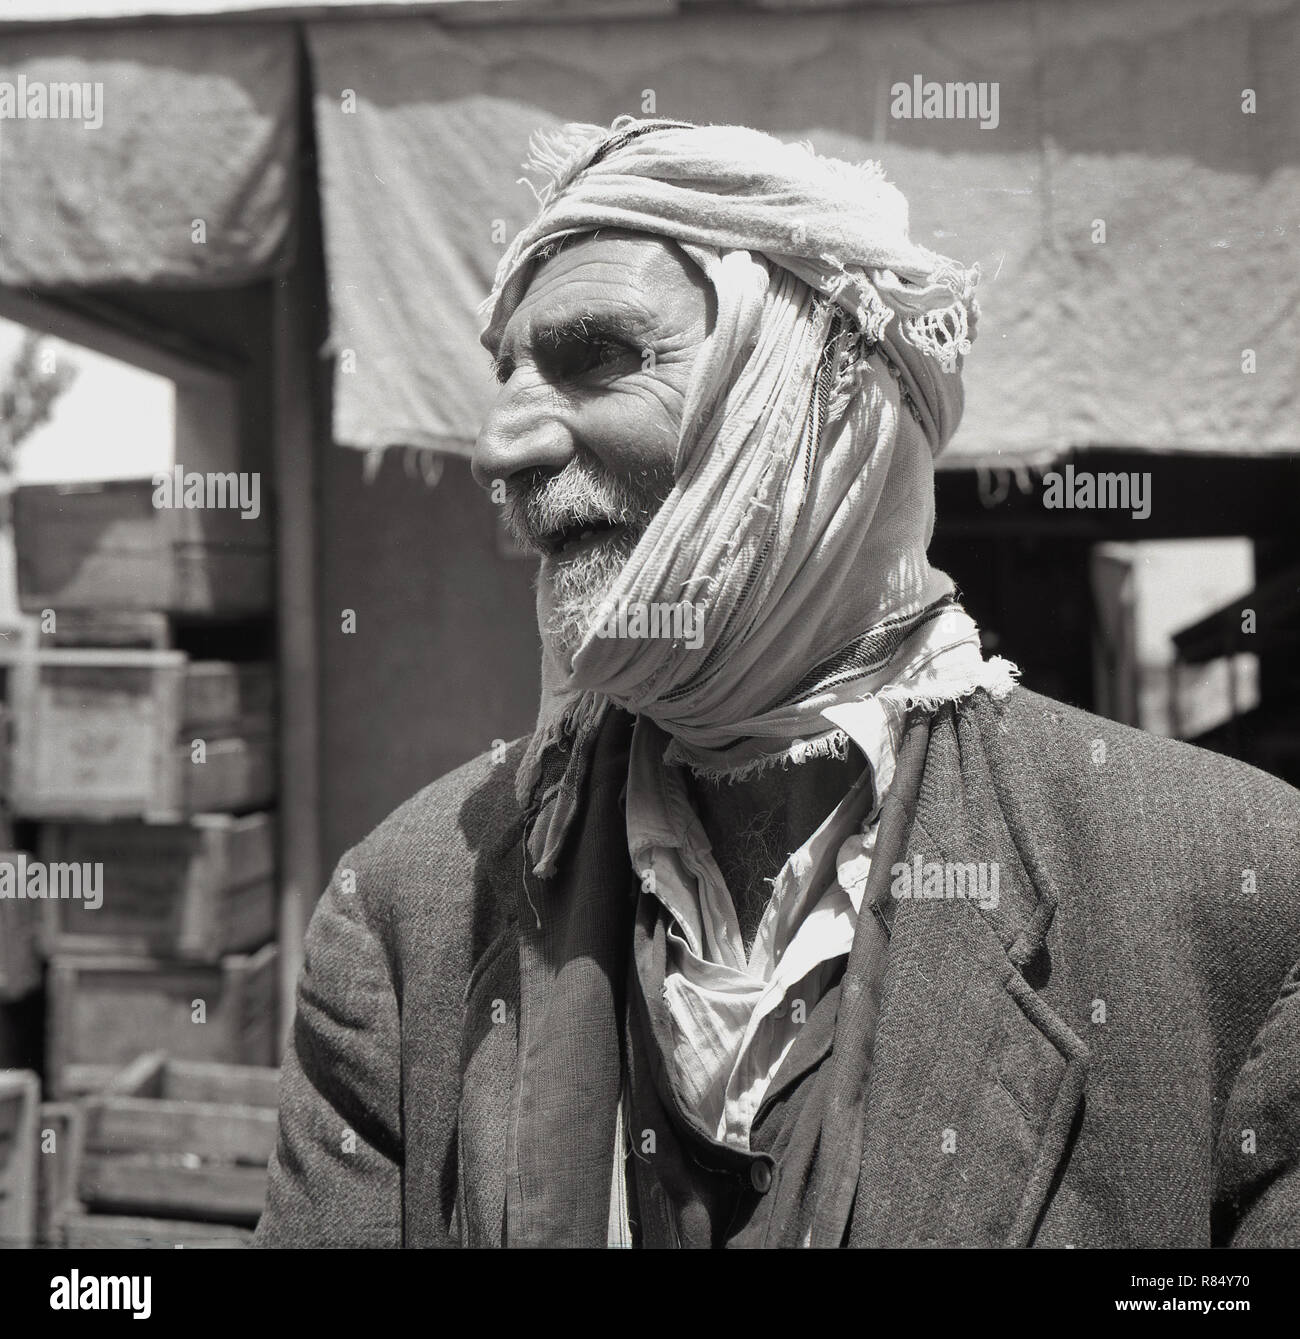 1940s, historical, bearded palestinian arab, wearing a cloth scarf around his head and ragged clothes. Palestinians are those people whose ancestors were born in the geographical area pre-1948 known as Palestine or who came from the territory corresponding to what is referred to as 'Mandatory Palestine' and what is now Israel, the West Bank and the Gaza Strip. Stock Photo